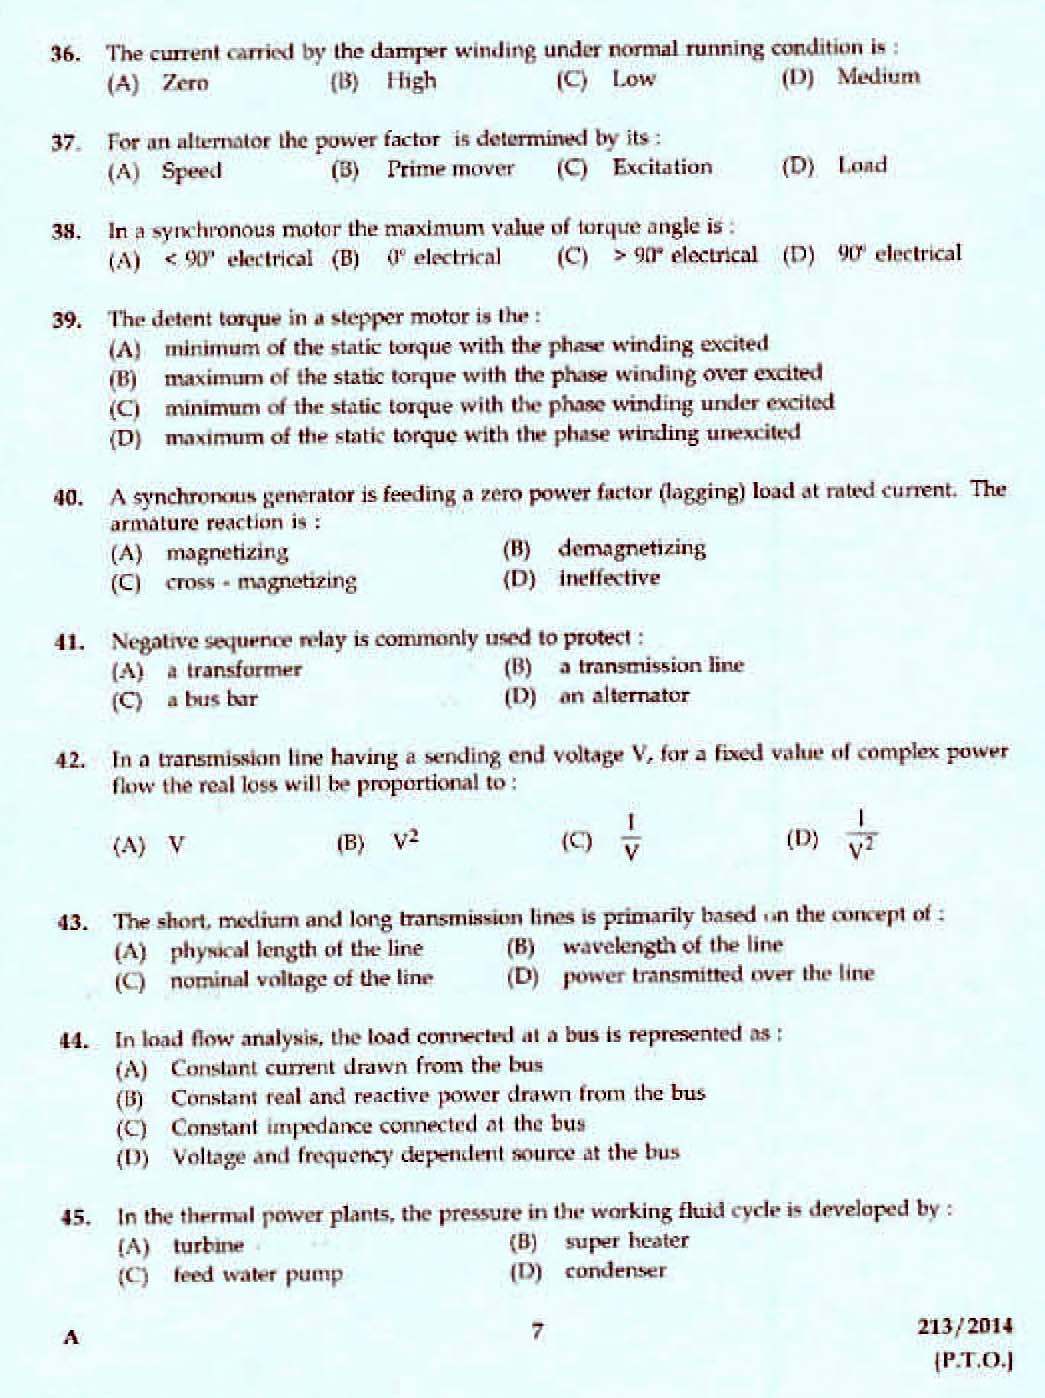 Kerala PSC Assistant Engineer Electrical Exam 2014 Question Paper Code 2132014 5